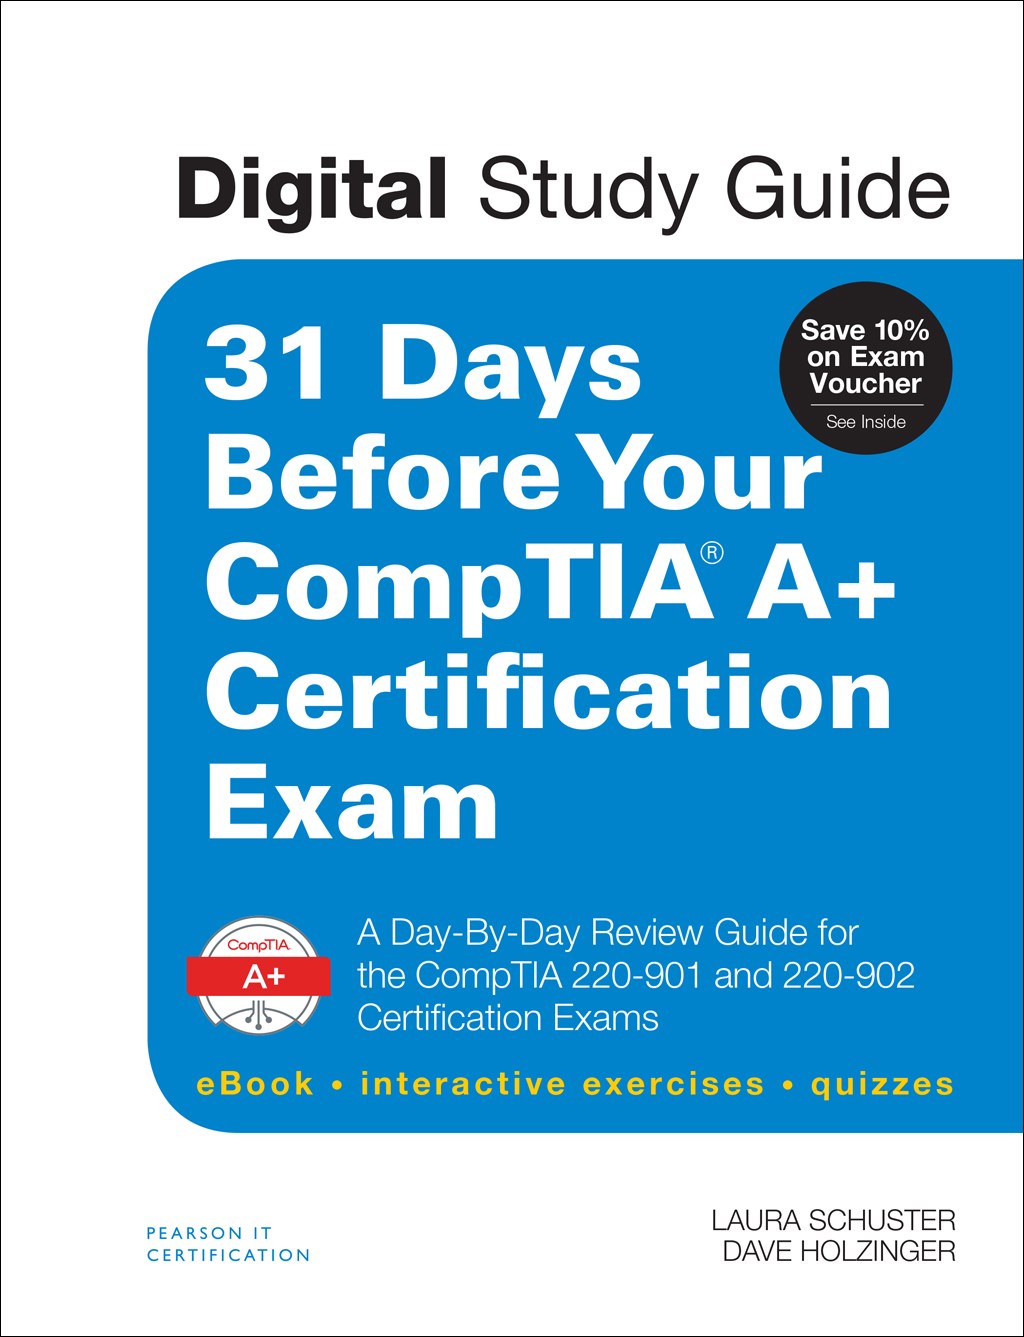 31 Days Before Your CompTIA A+ Certification Exam (Digital Study Guide): A Day-By-Day Review Guide for the CompTIA 220-901 and 220-902 Certification exams (eBook, interactive exercises, quizzes)